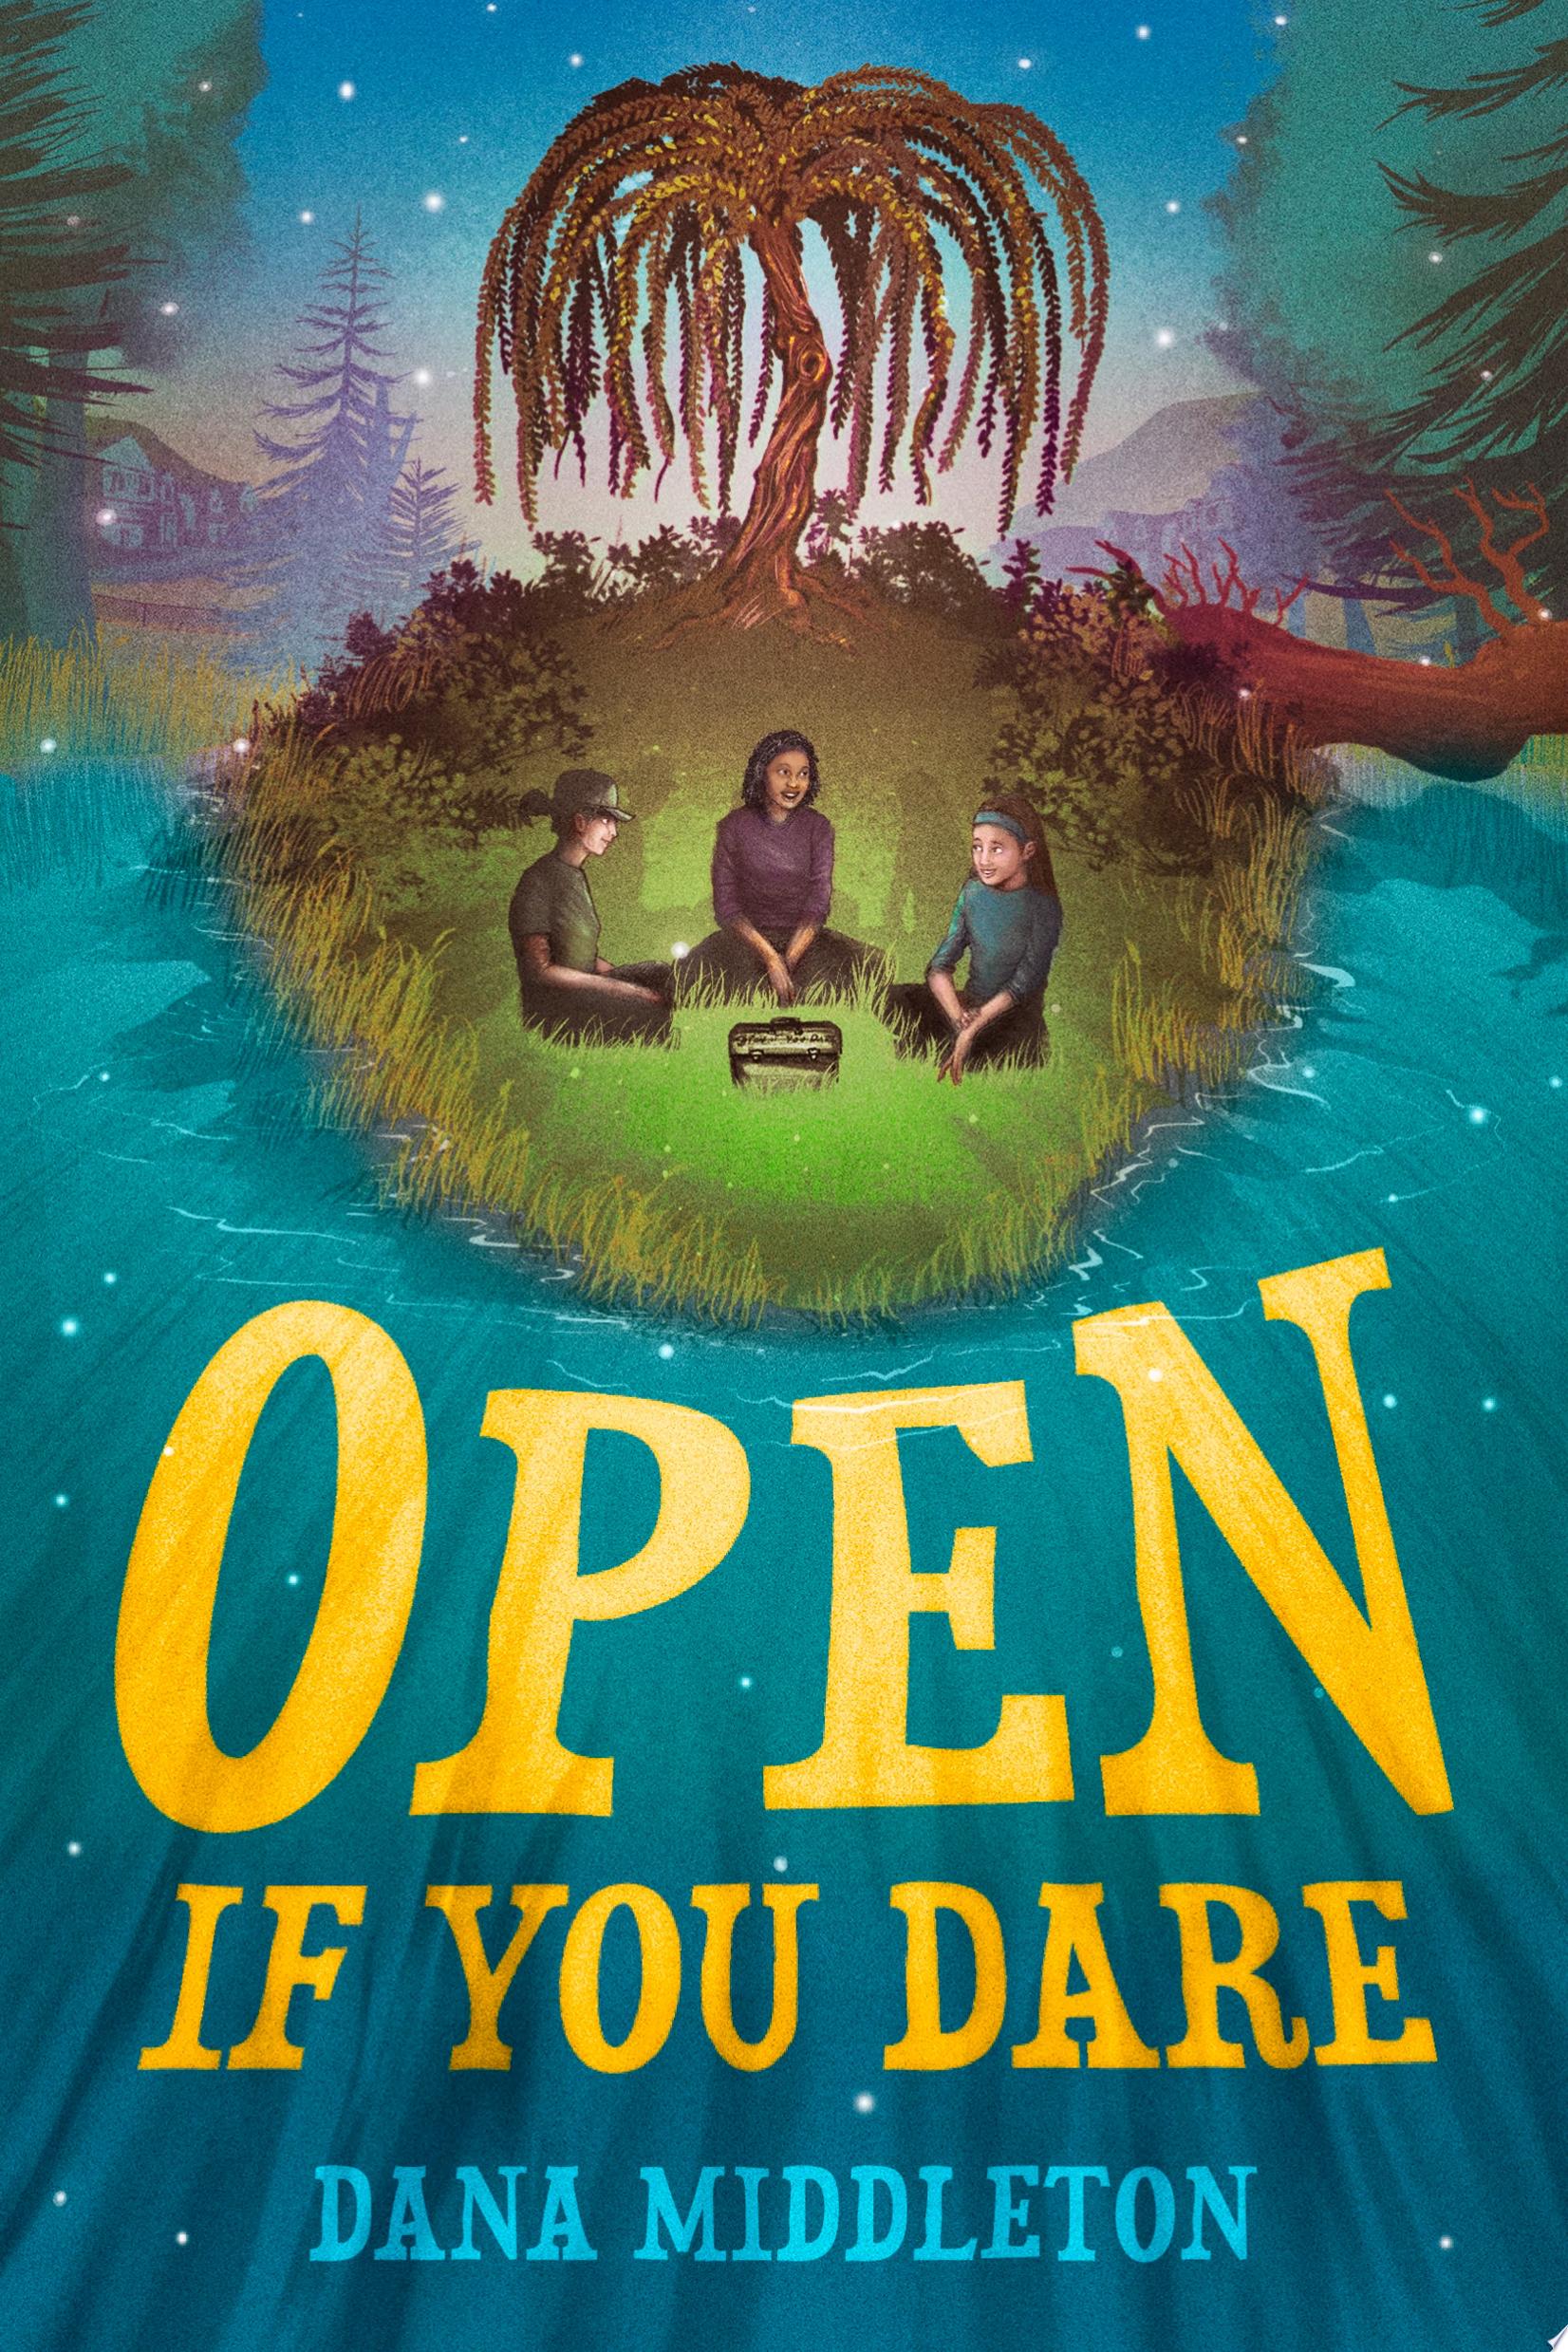 Image for "Open If You Dare"